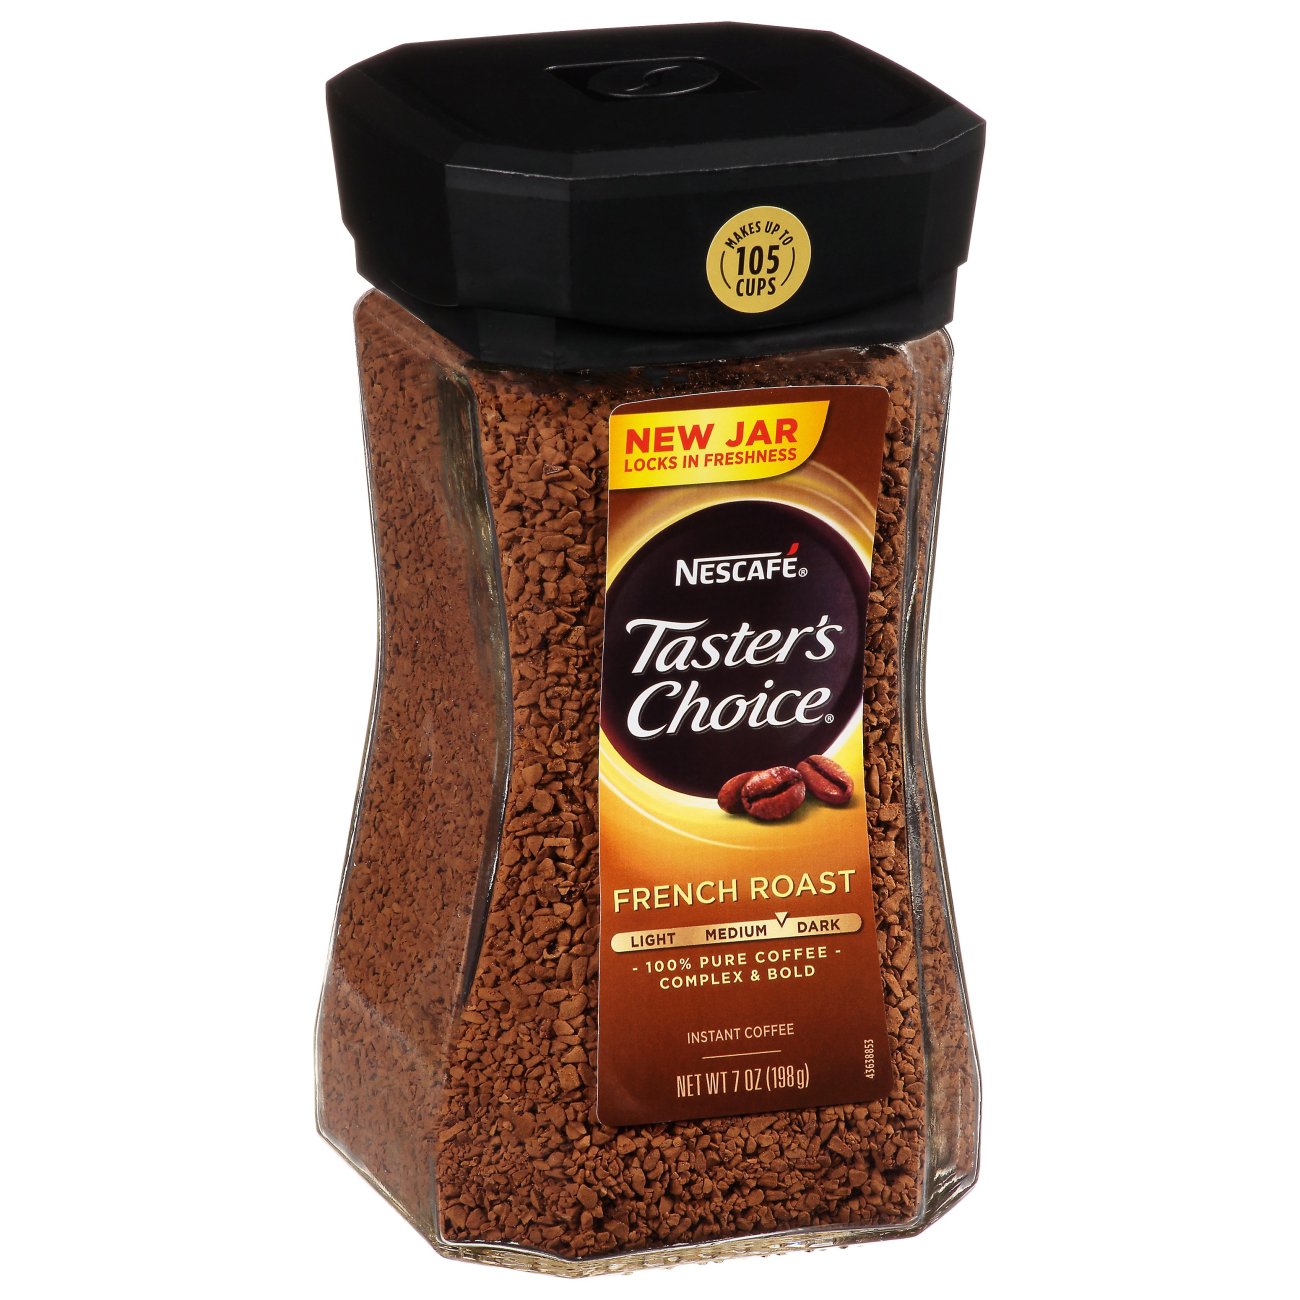 Nescafe Tasters Choice French Roast Instant Coffee Shop Coffee At H-E-B ...